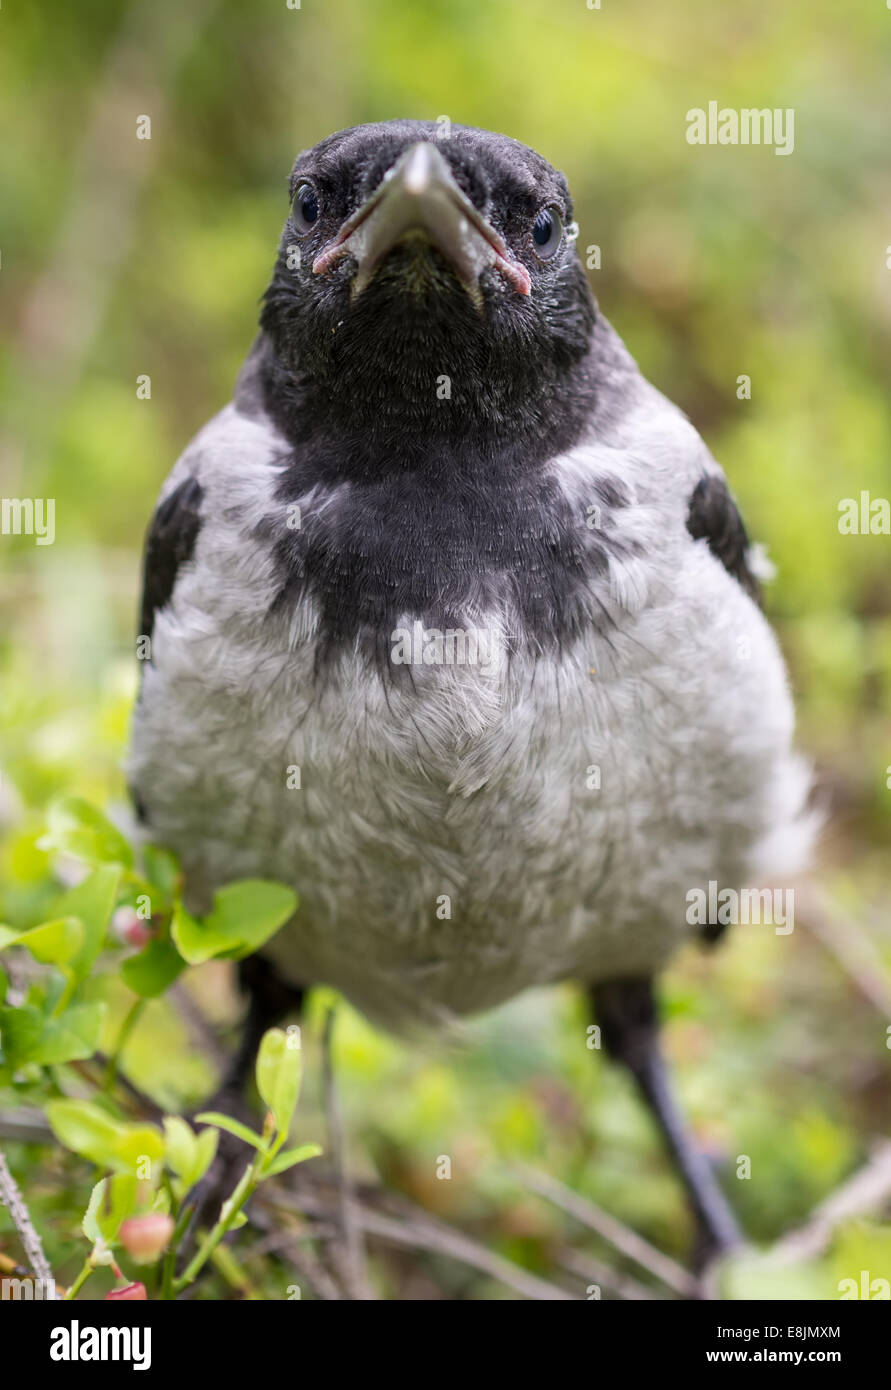 Young hooded crow chick standing on a stone. The Hooded Crow (Corvus cornix) (also called Hoodiecrow) is a Eurasian bird species Stock Photo